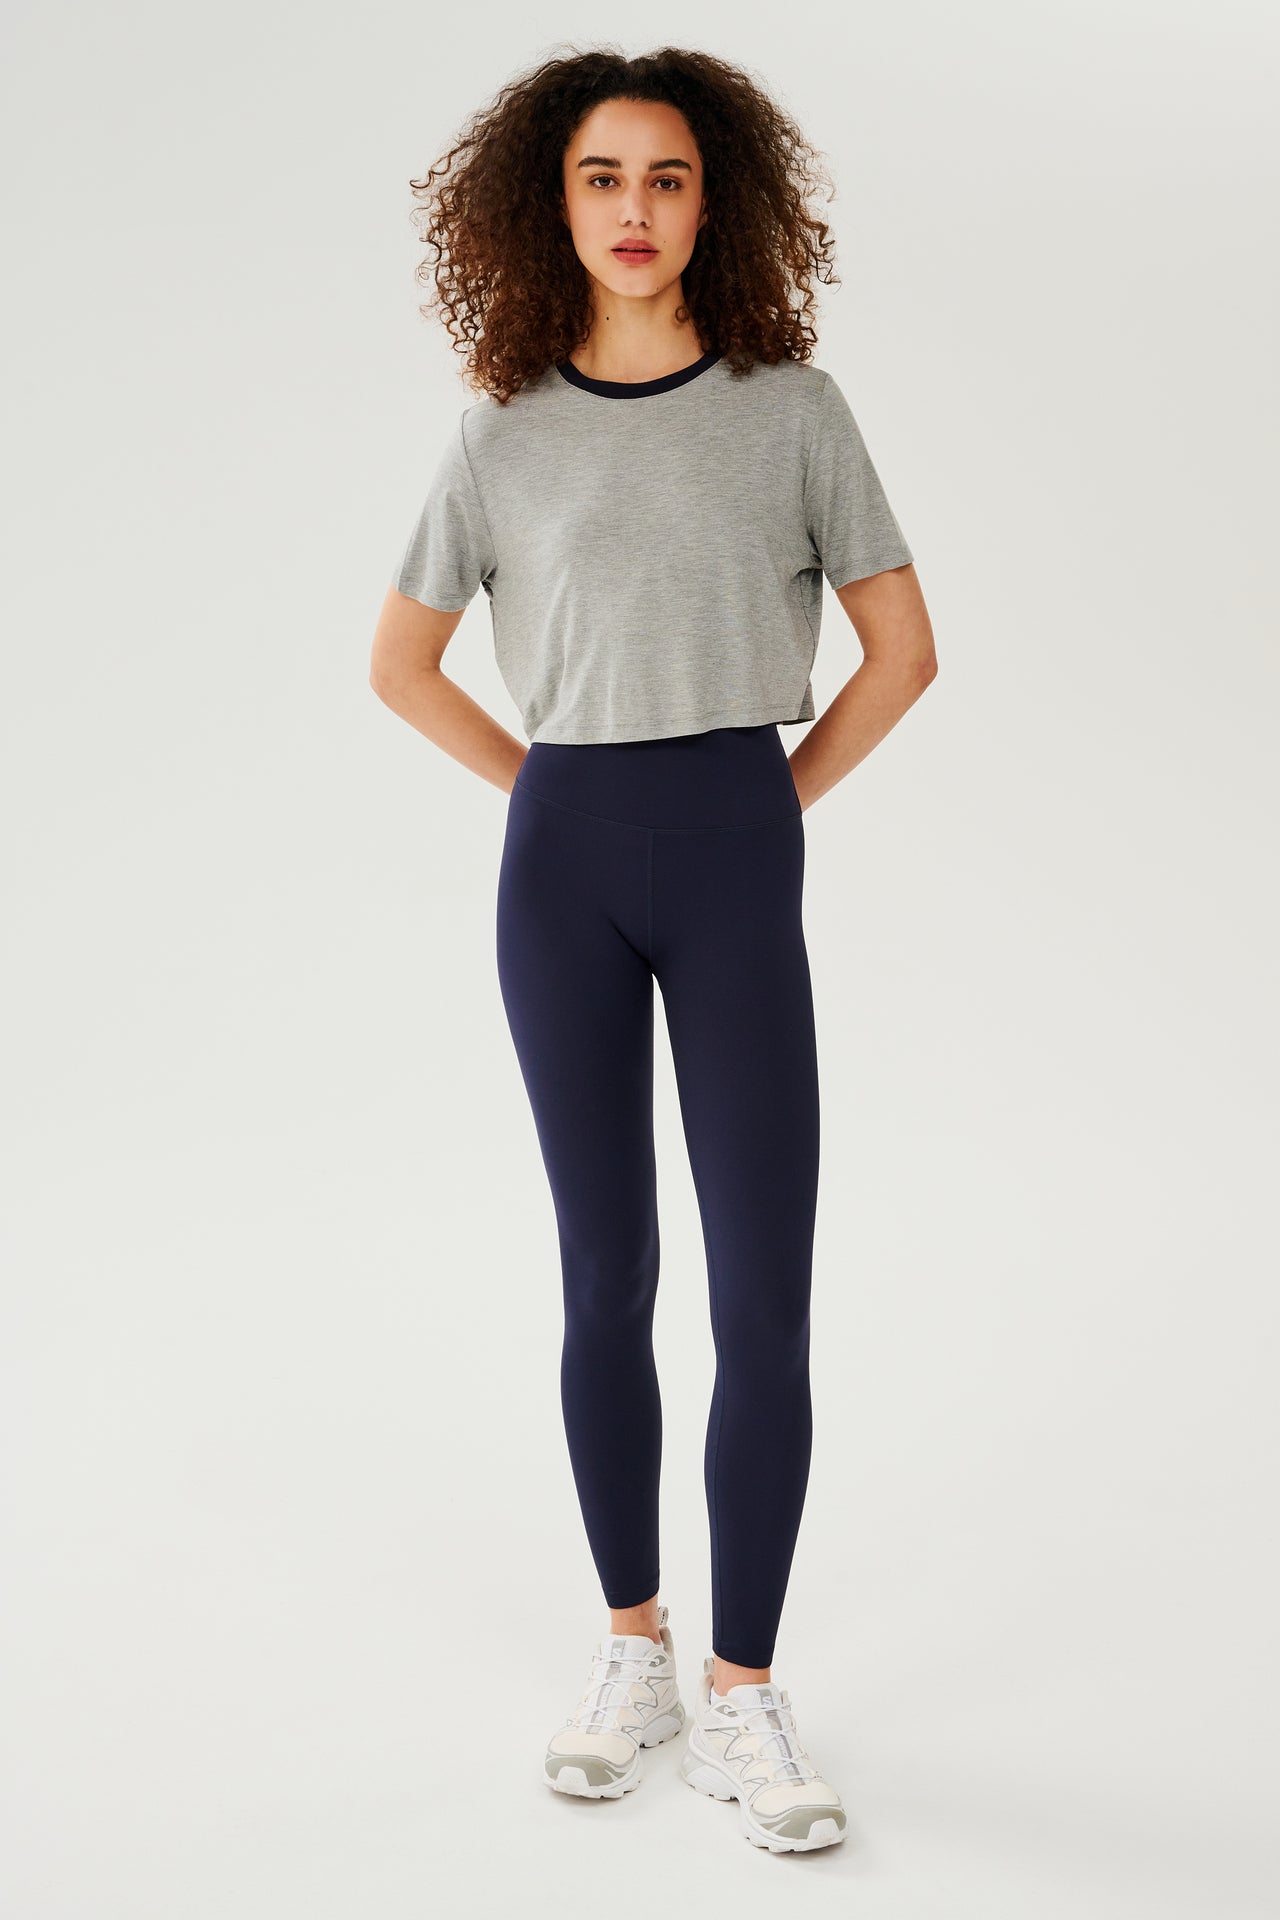 Full front view of girl wearing  light grey cropped short sleeve t-shirt with thin dark blue neck hem and dark blue leggings with white shoes